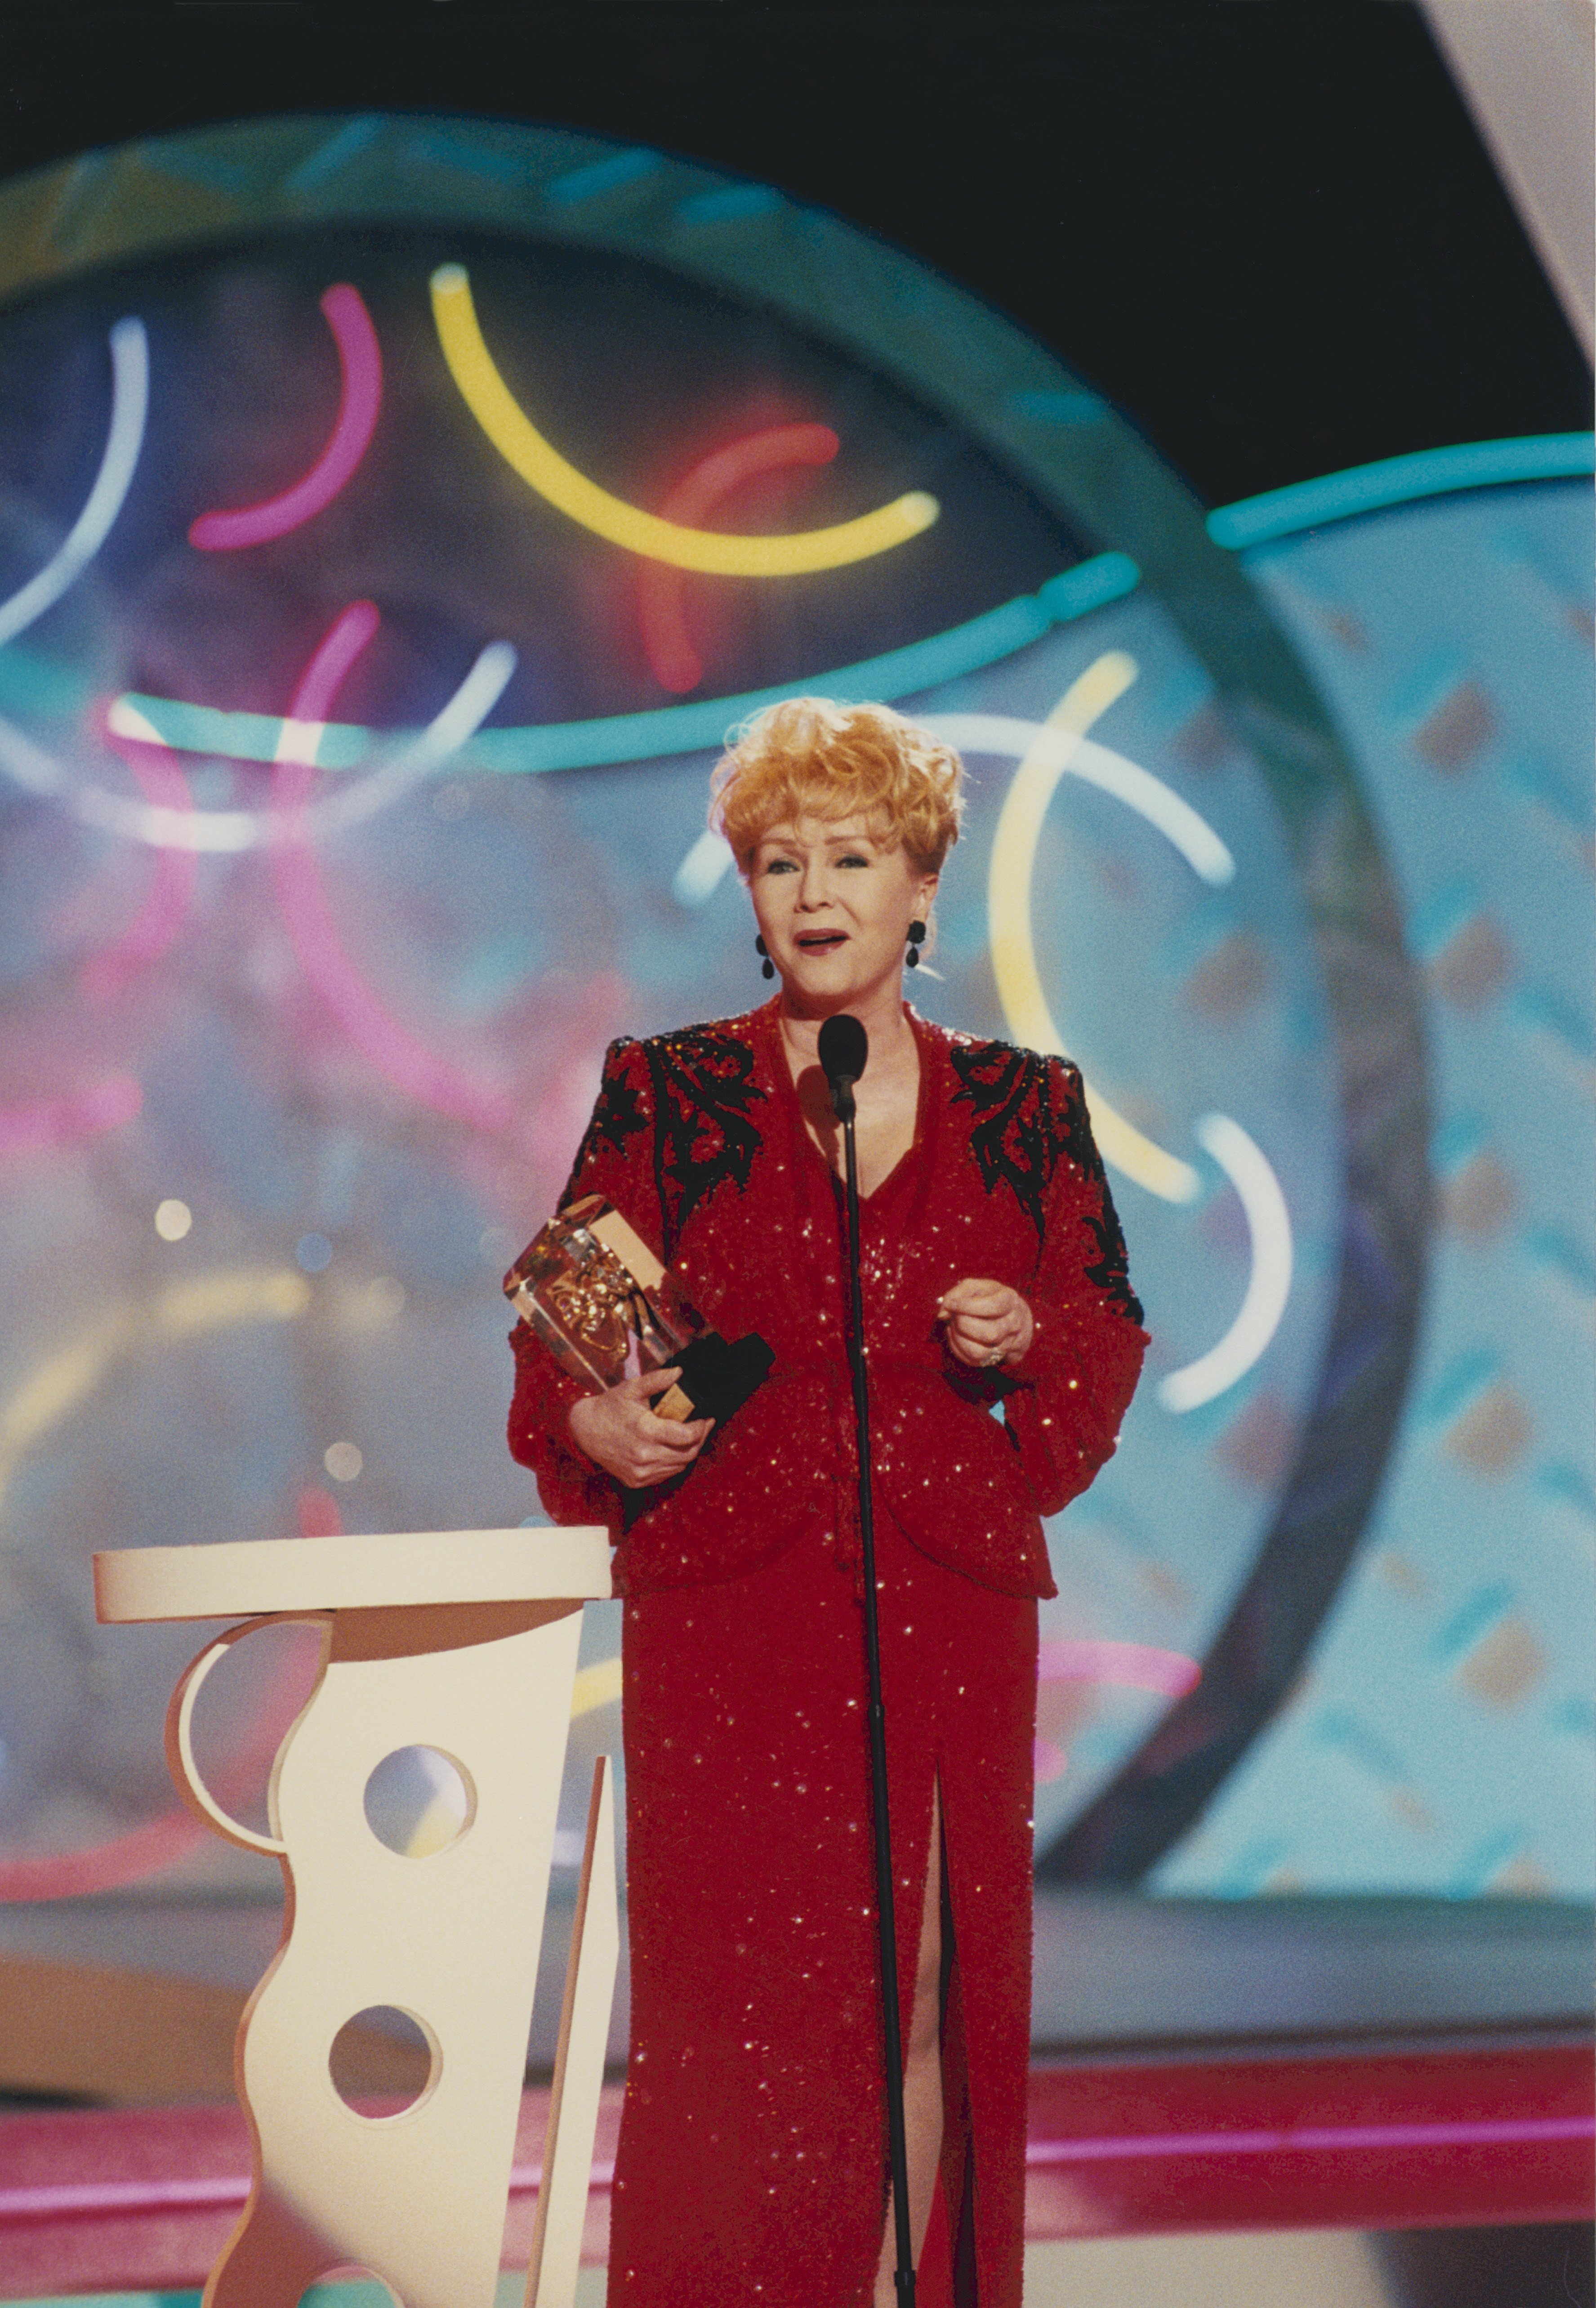 Debbie Reynolds at the American Comedy Awards on February 9, 1997, at the Shrine Auditorium in Los Angeles, California. | Source: Getty Images.